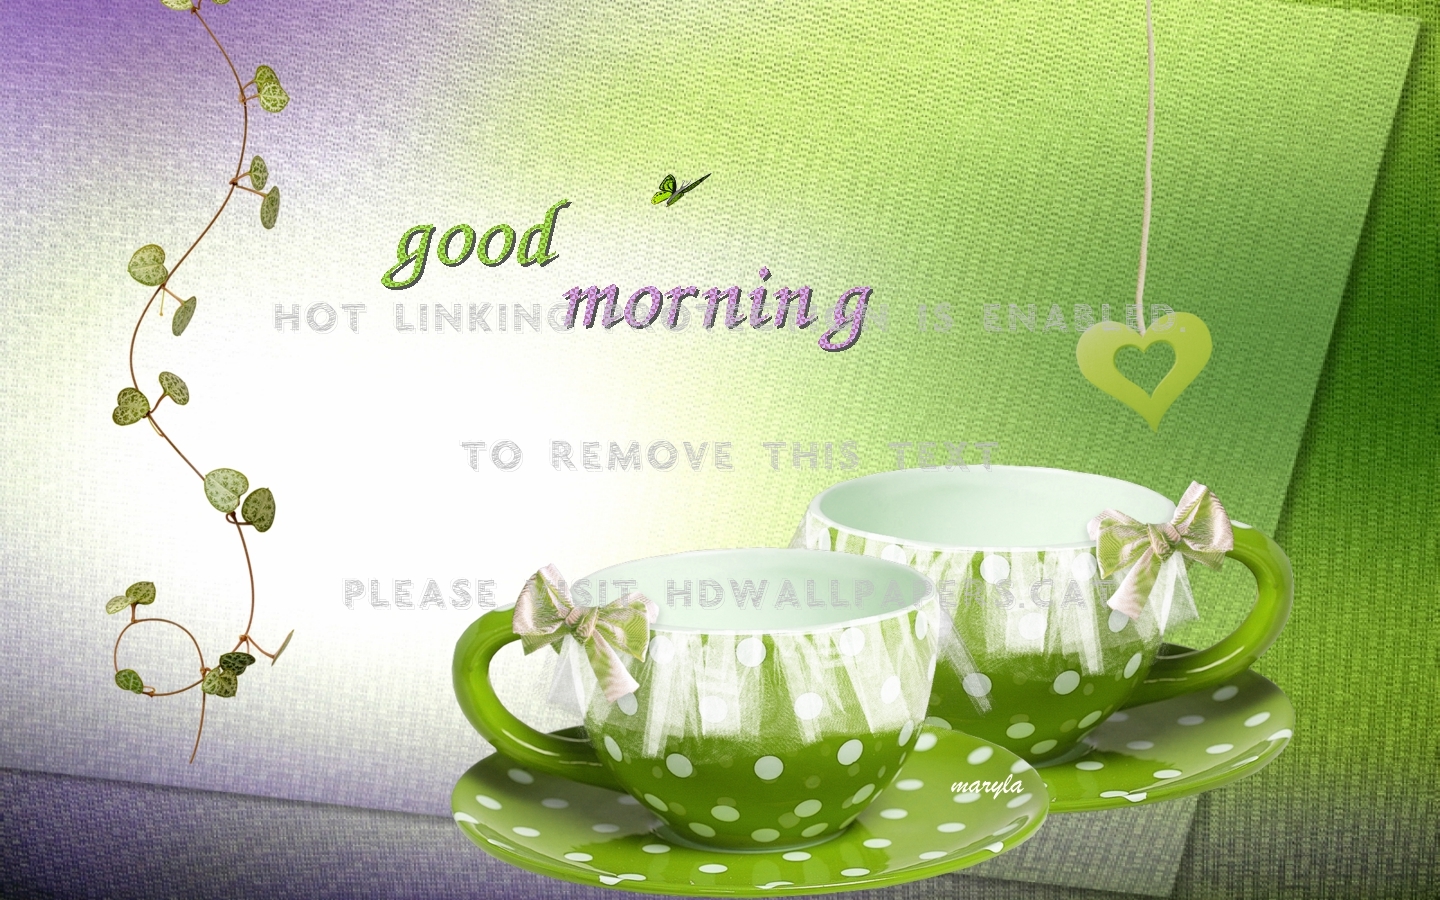 Good Morning Abstract Love Hearts Cup Tea - Good Morning Cool Images Hd - HD Wallpaper 